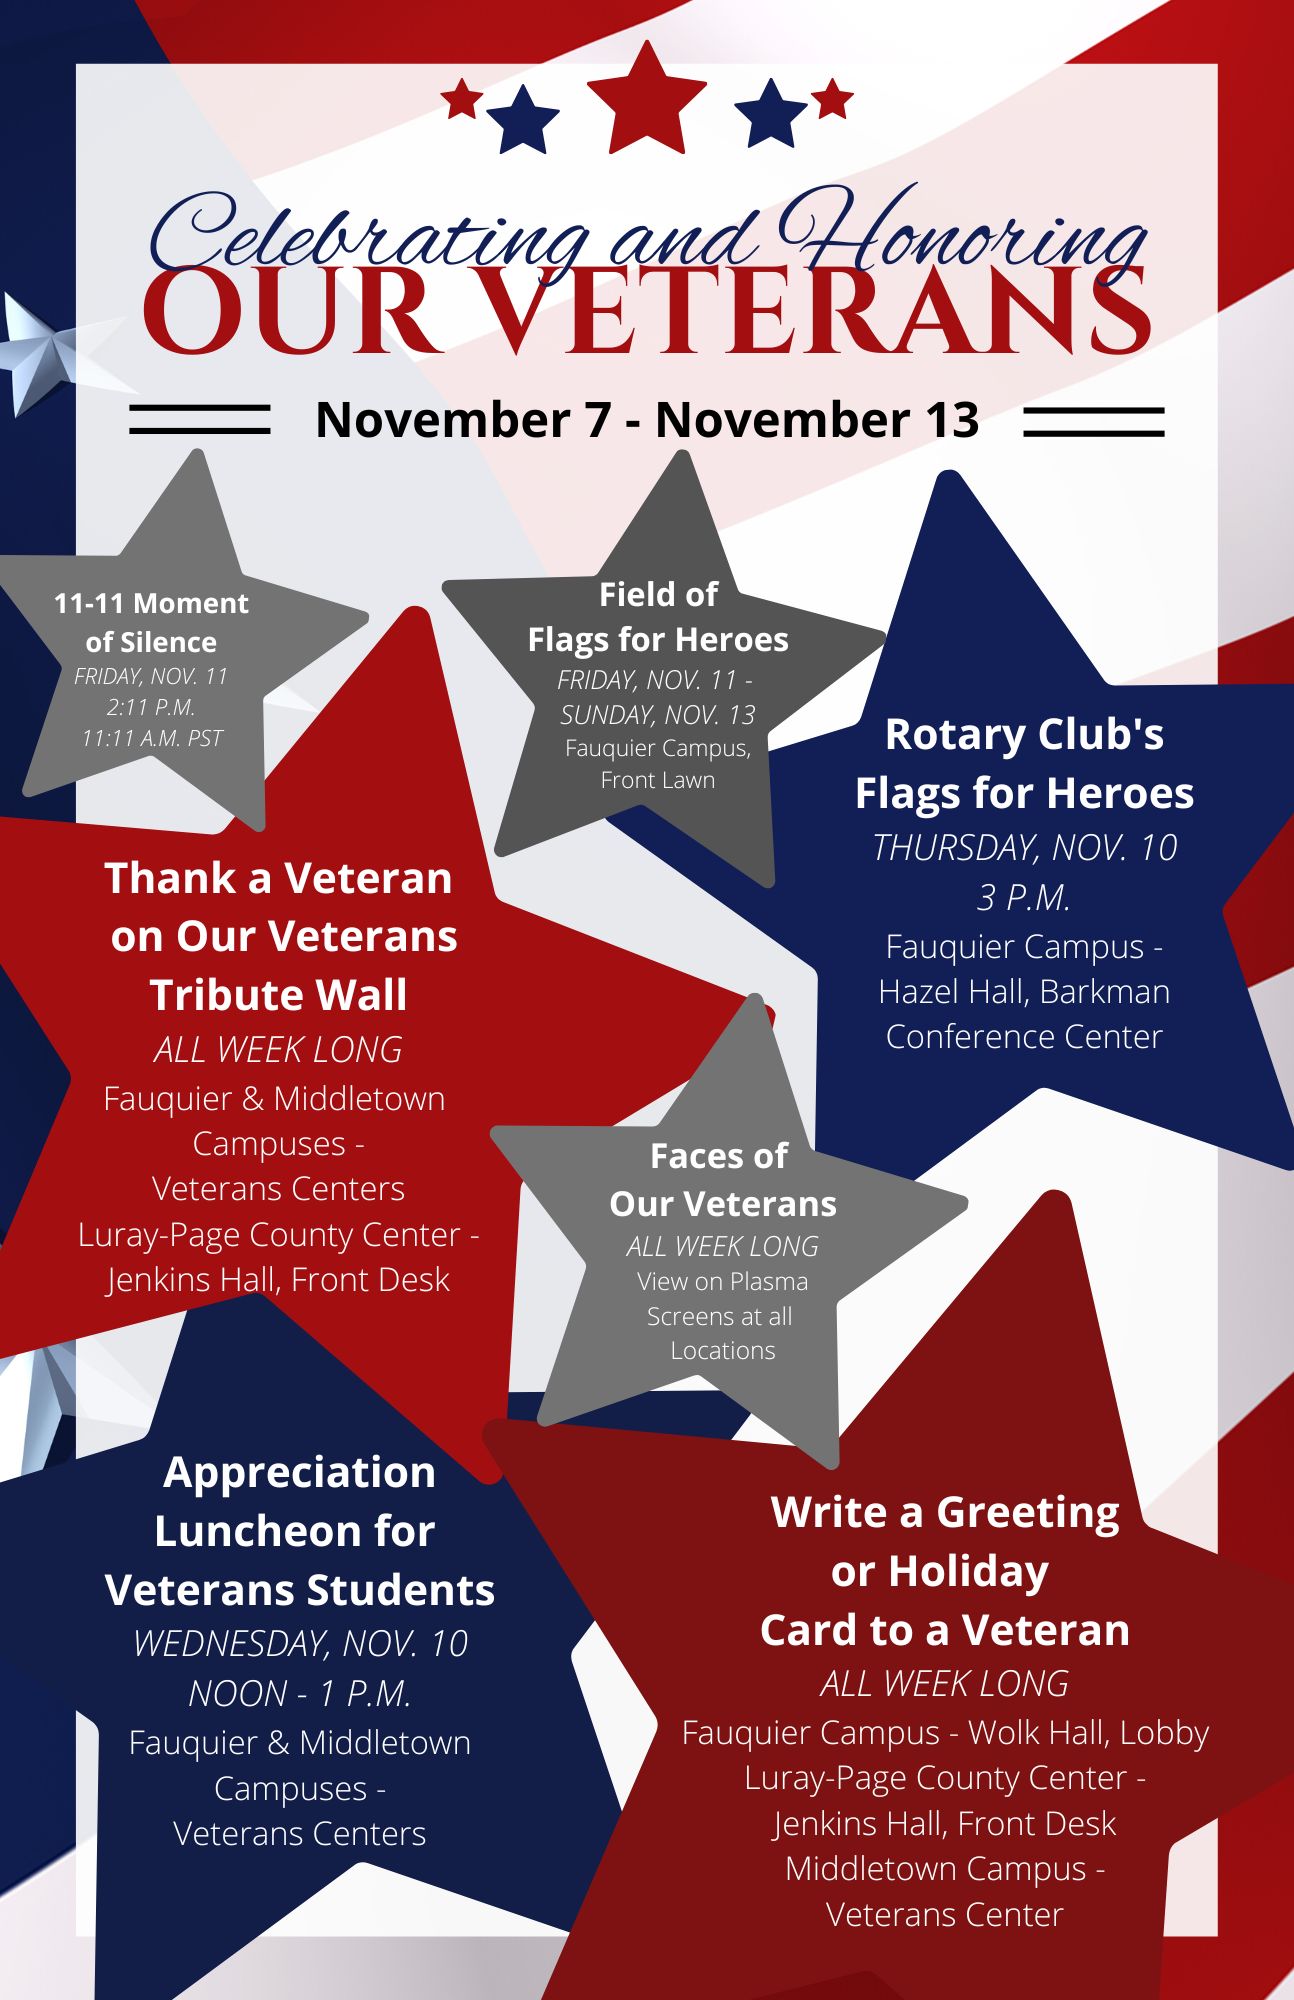 Celebrating and Honoring our Veterans